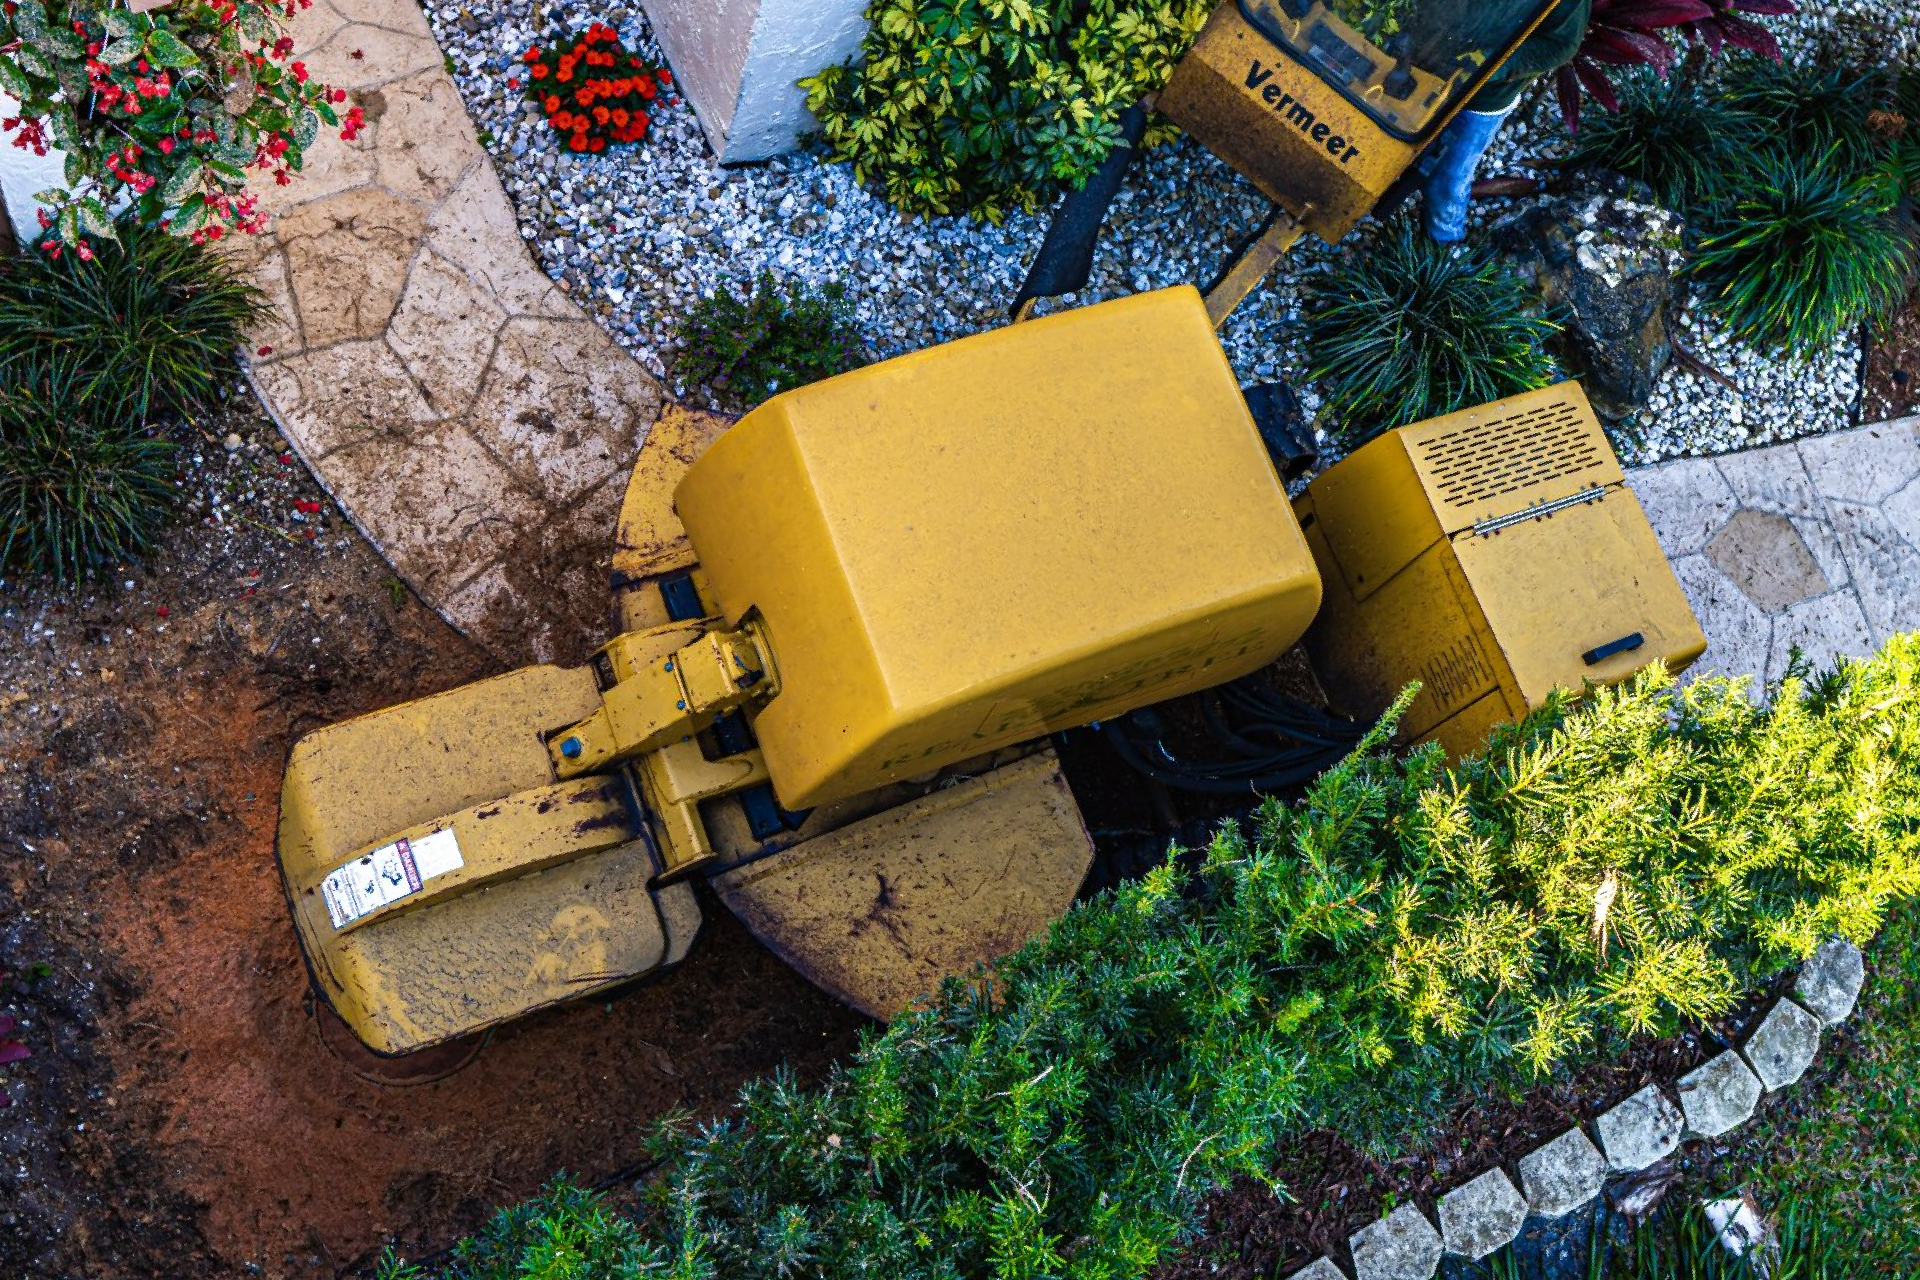 stump grinding machine removing a stump in Palm Beach County